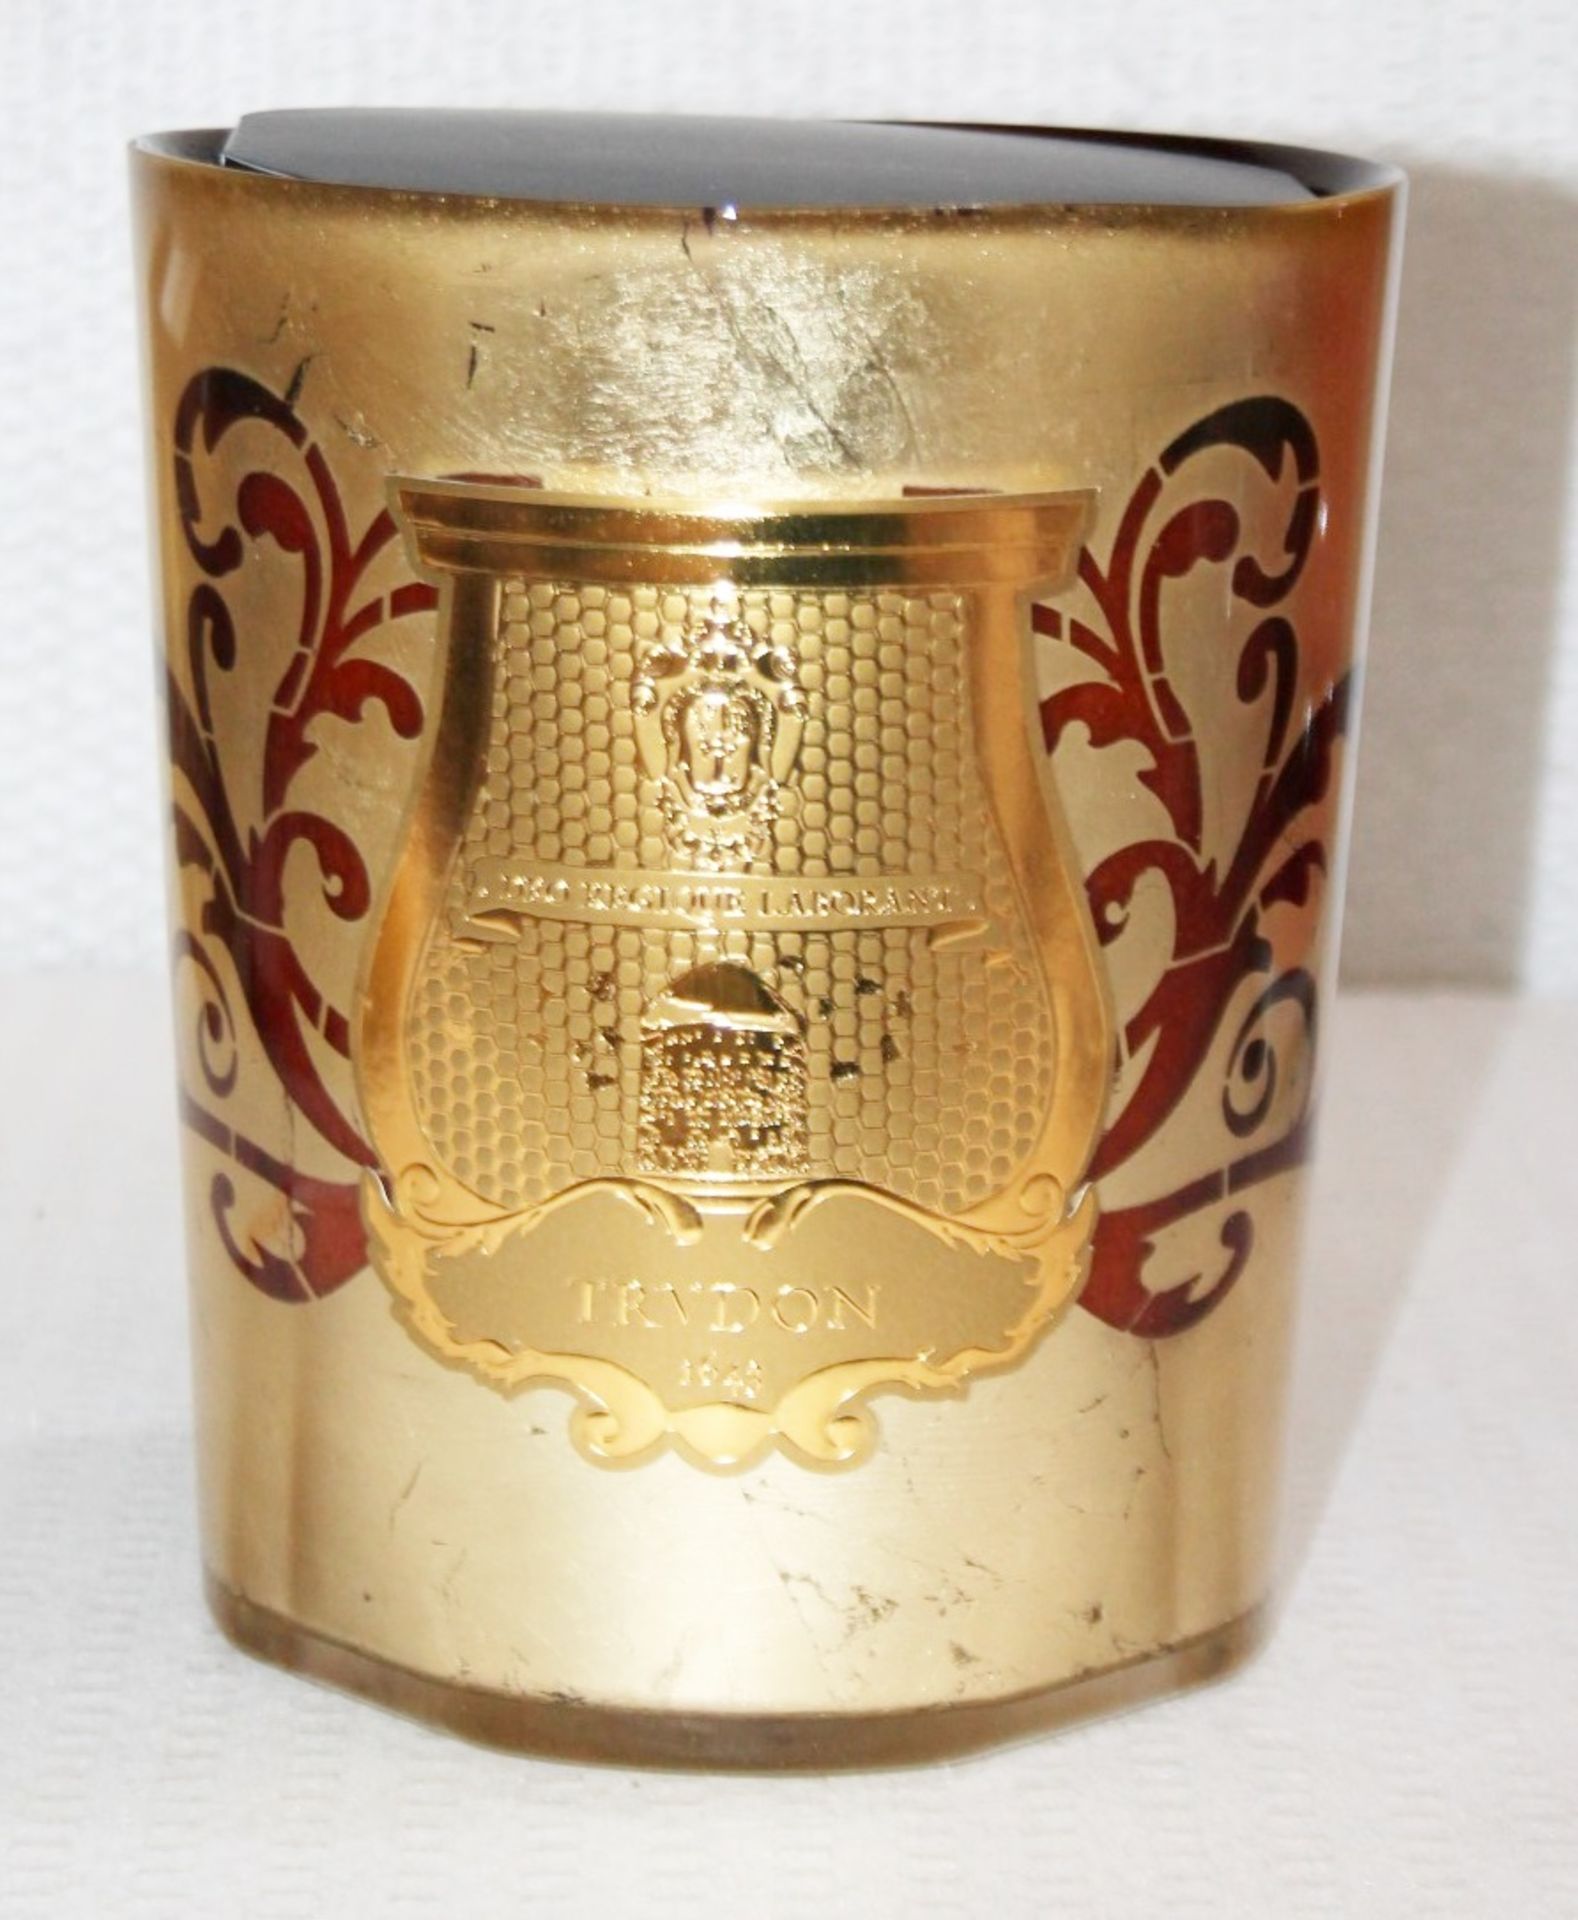 1 x CIRE TRUDON Christmas Bayonne Great Candle (3kg) - Original Price £550.00 - Unused Boxed Stock - - Image 3 of 8